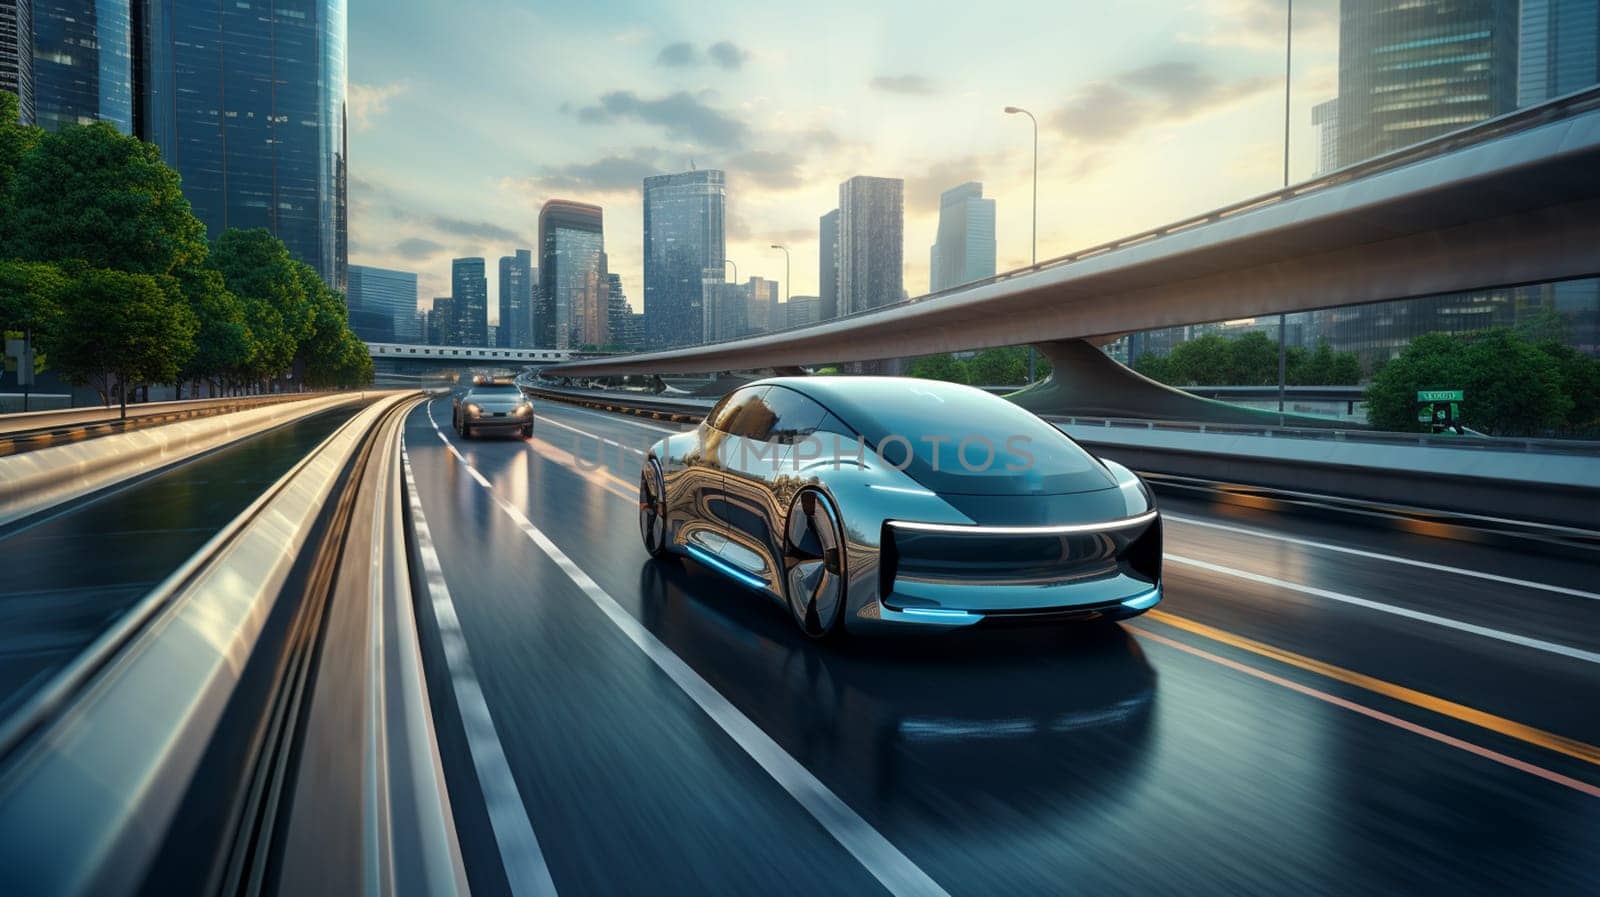 Autonomous Self-Driving 3D Car Moving Through City Highway. Visualization Concept: AI Sensor Scanning Road Ahead for Vehicles, Danger, Speed Limits. Day Urban Driveway. Front Following View by Andelov13